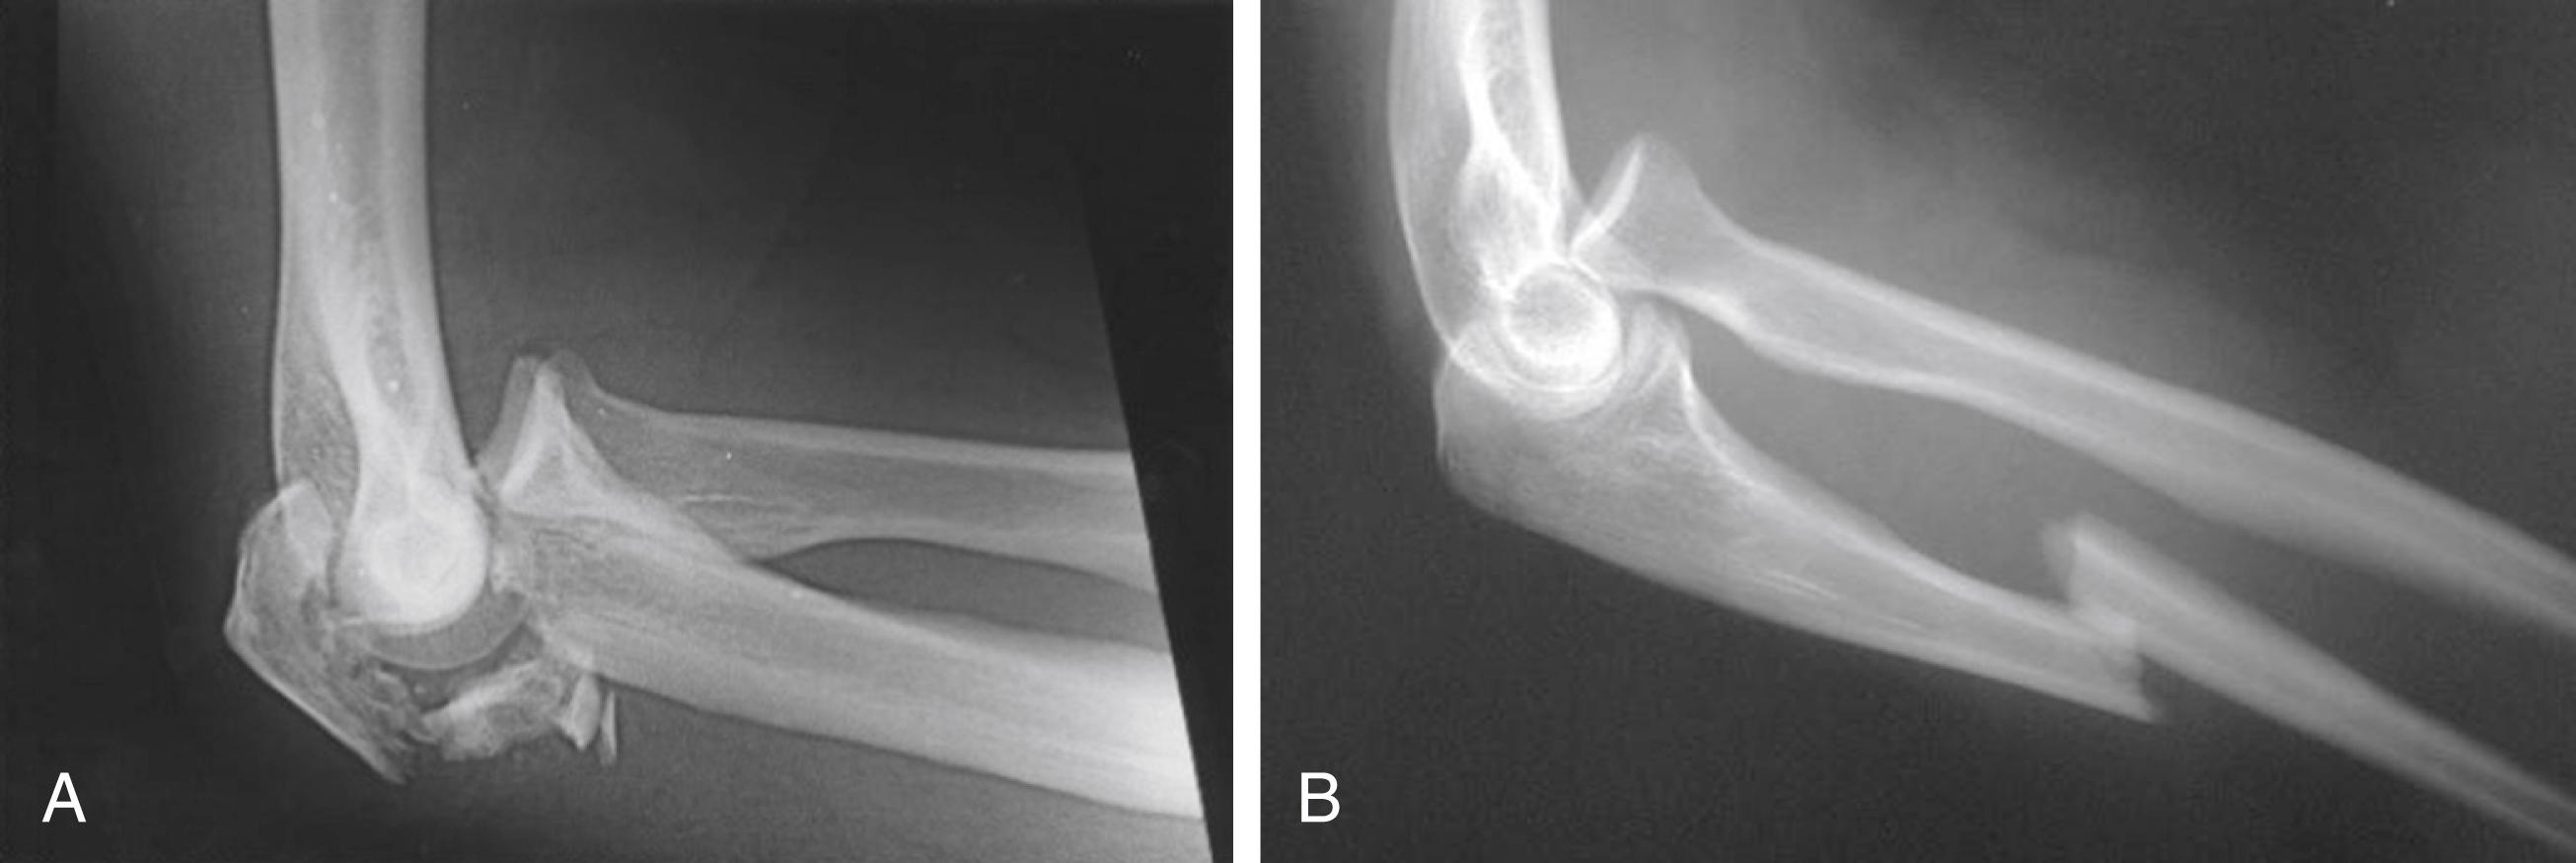 Fig. 54.1, (A) Lateral radiograph of an anterior (transolecranon) olecranon fracture-dislocation. The radioulnar relationship is intact and the entire forearm is subluxated anteriorly. There is impaction in the depths of the trochlear notch. (B) Lateral radiograph of an anterolateral Monteggia injury: diaphyseal fracture of the ulna with anterolateral dislocation of the radial head from the proximal radioulnar and radiocapitellar joints.